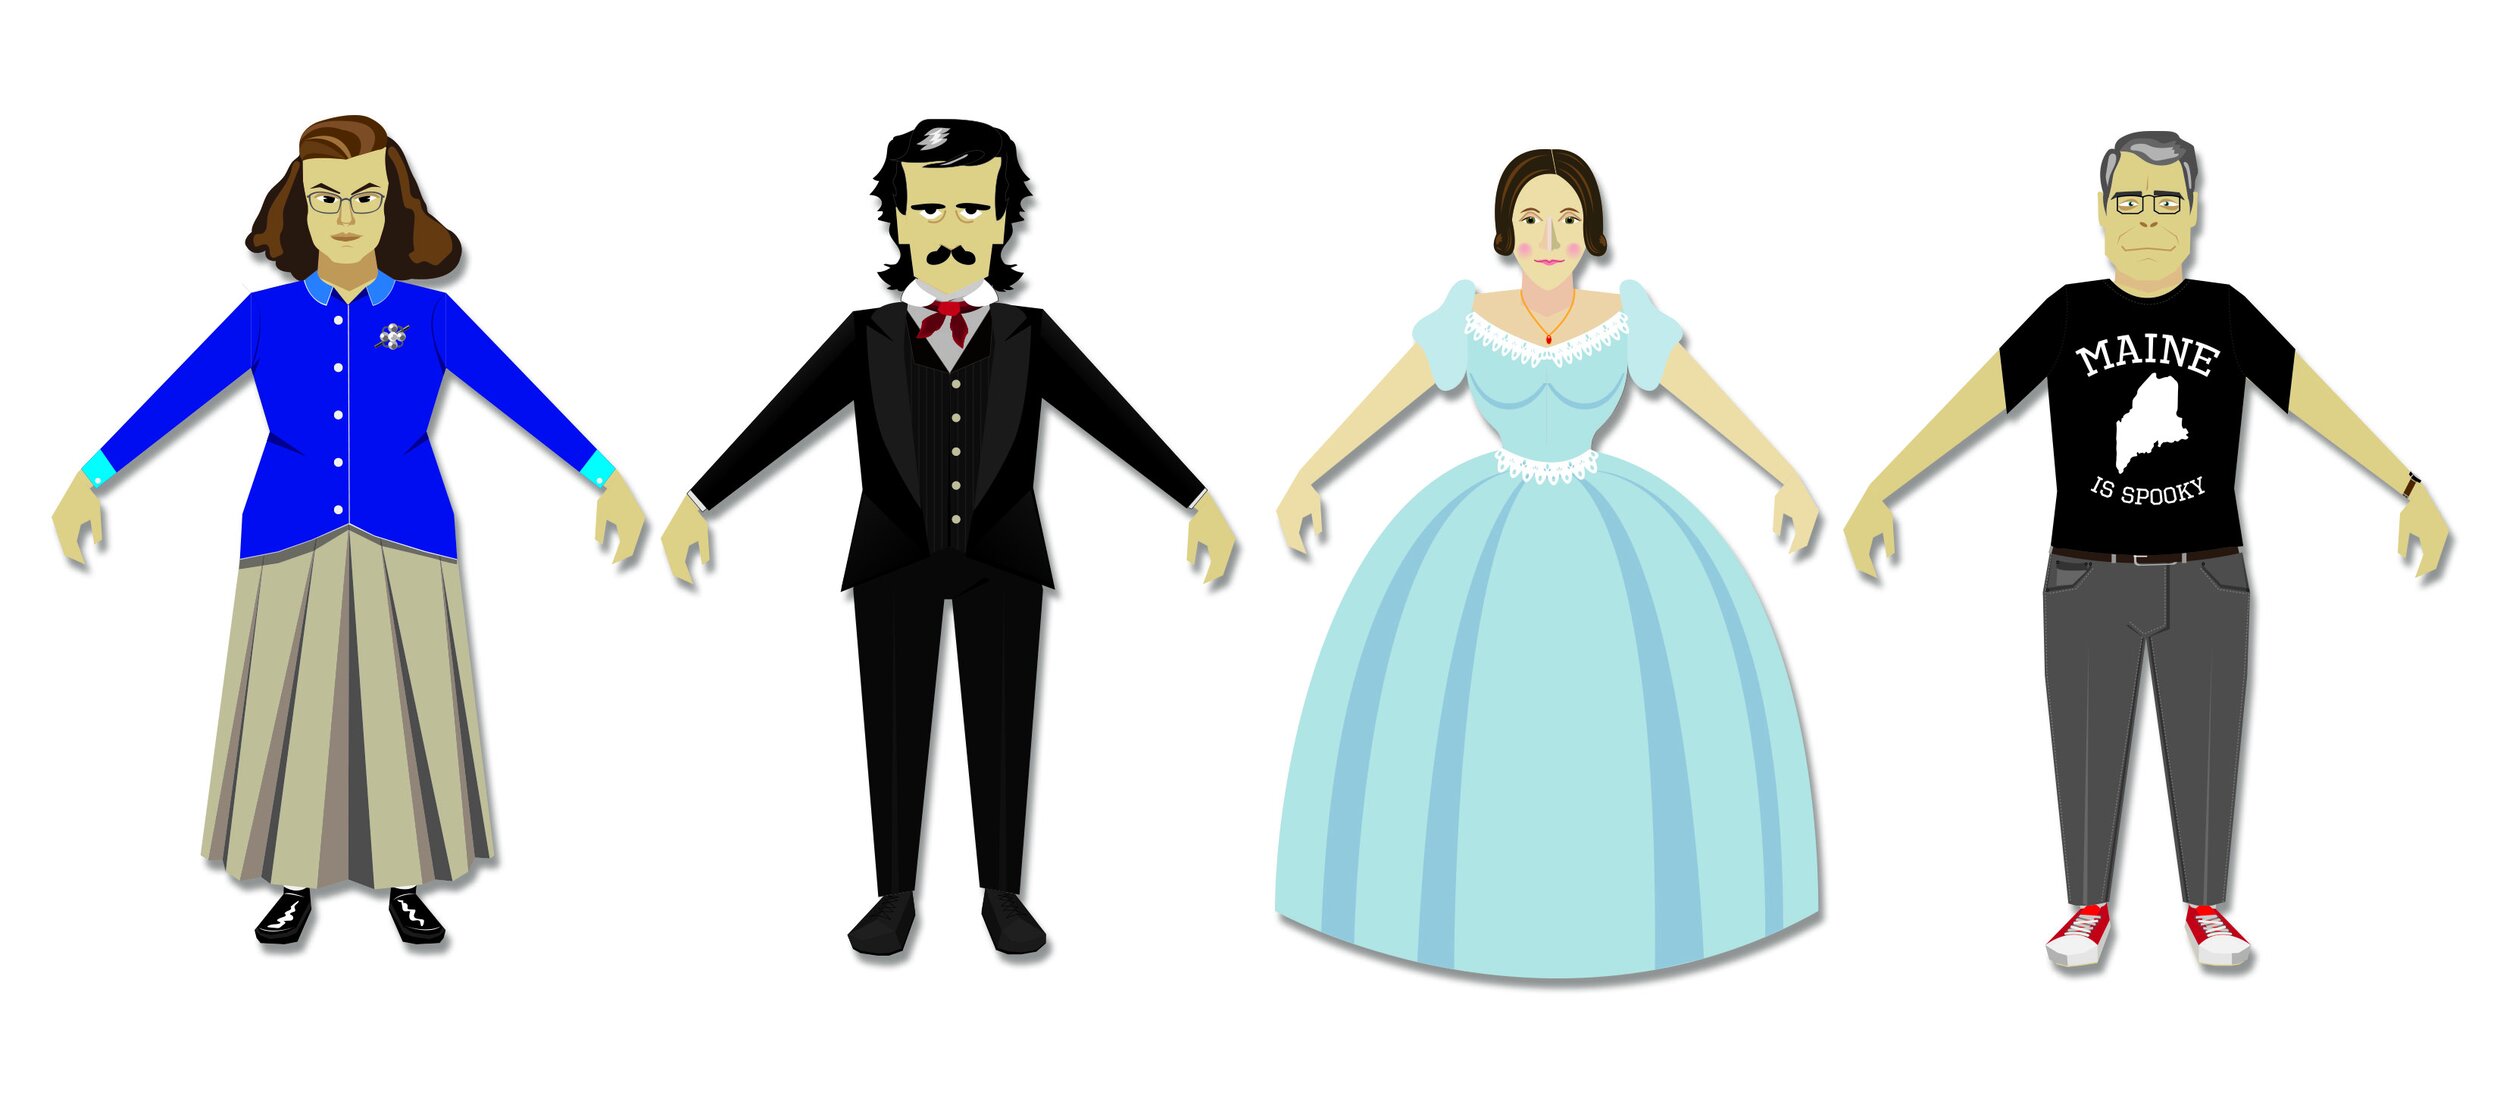 Paper Dolls of Notable Horror Authors